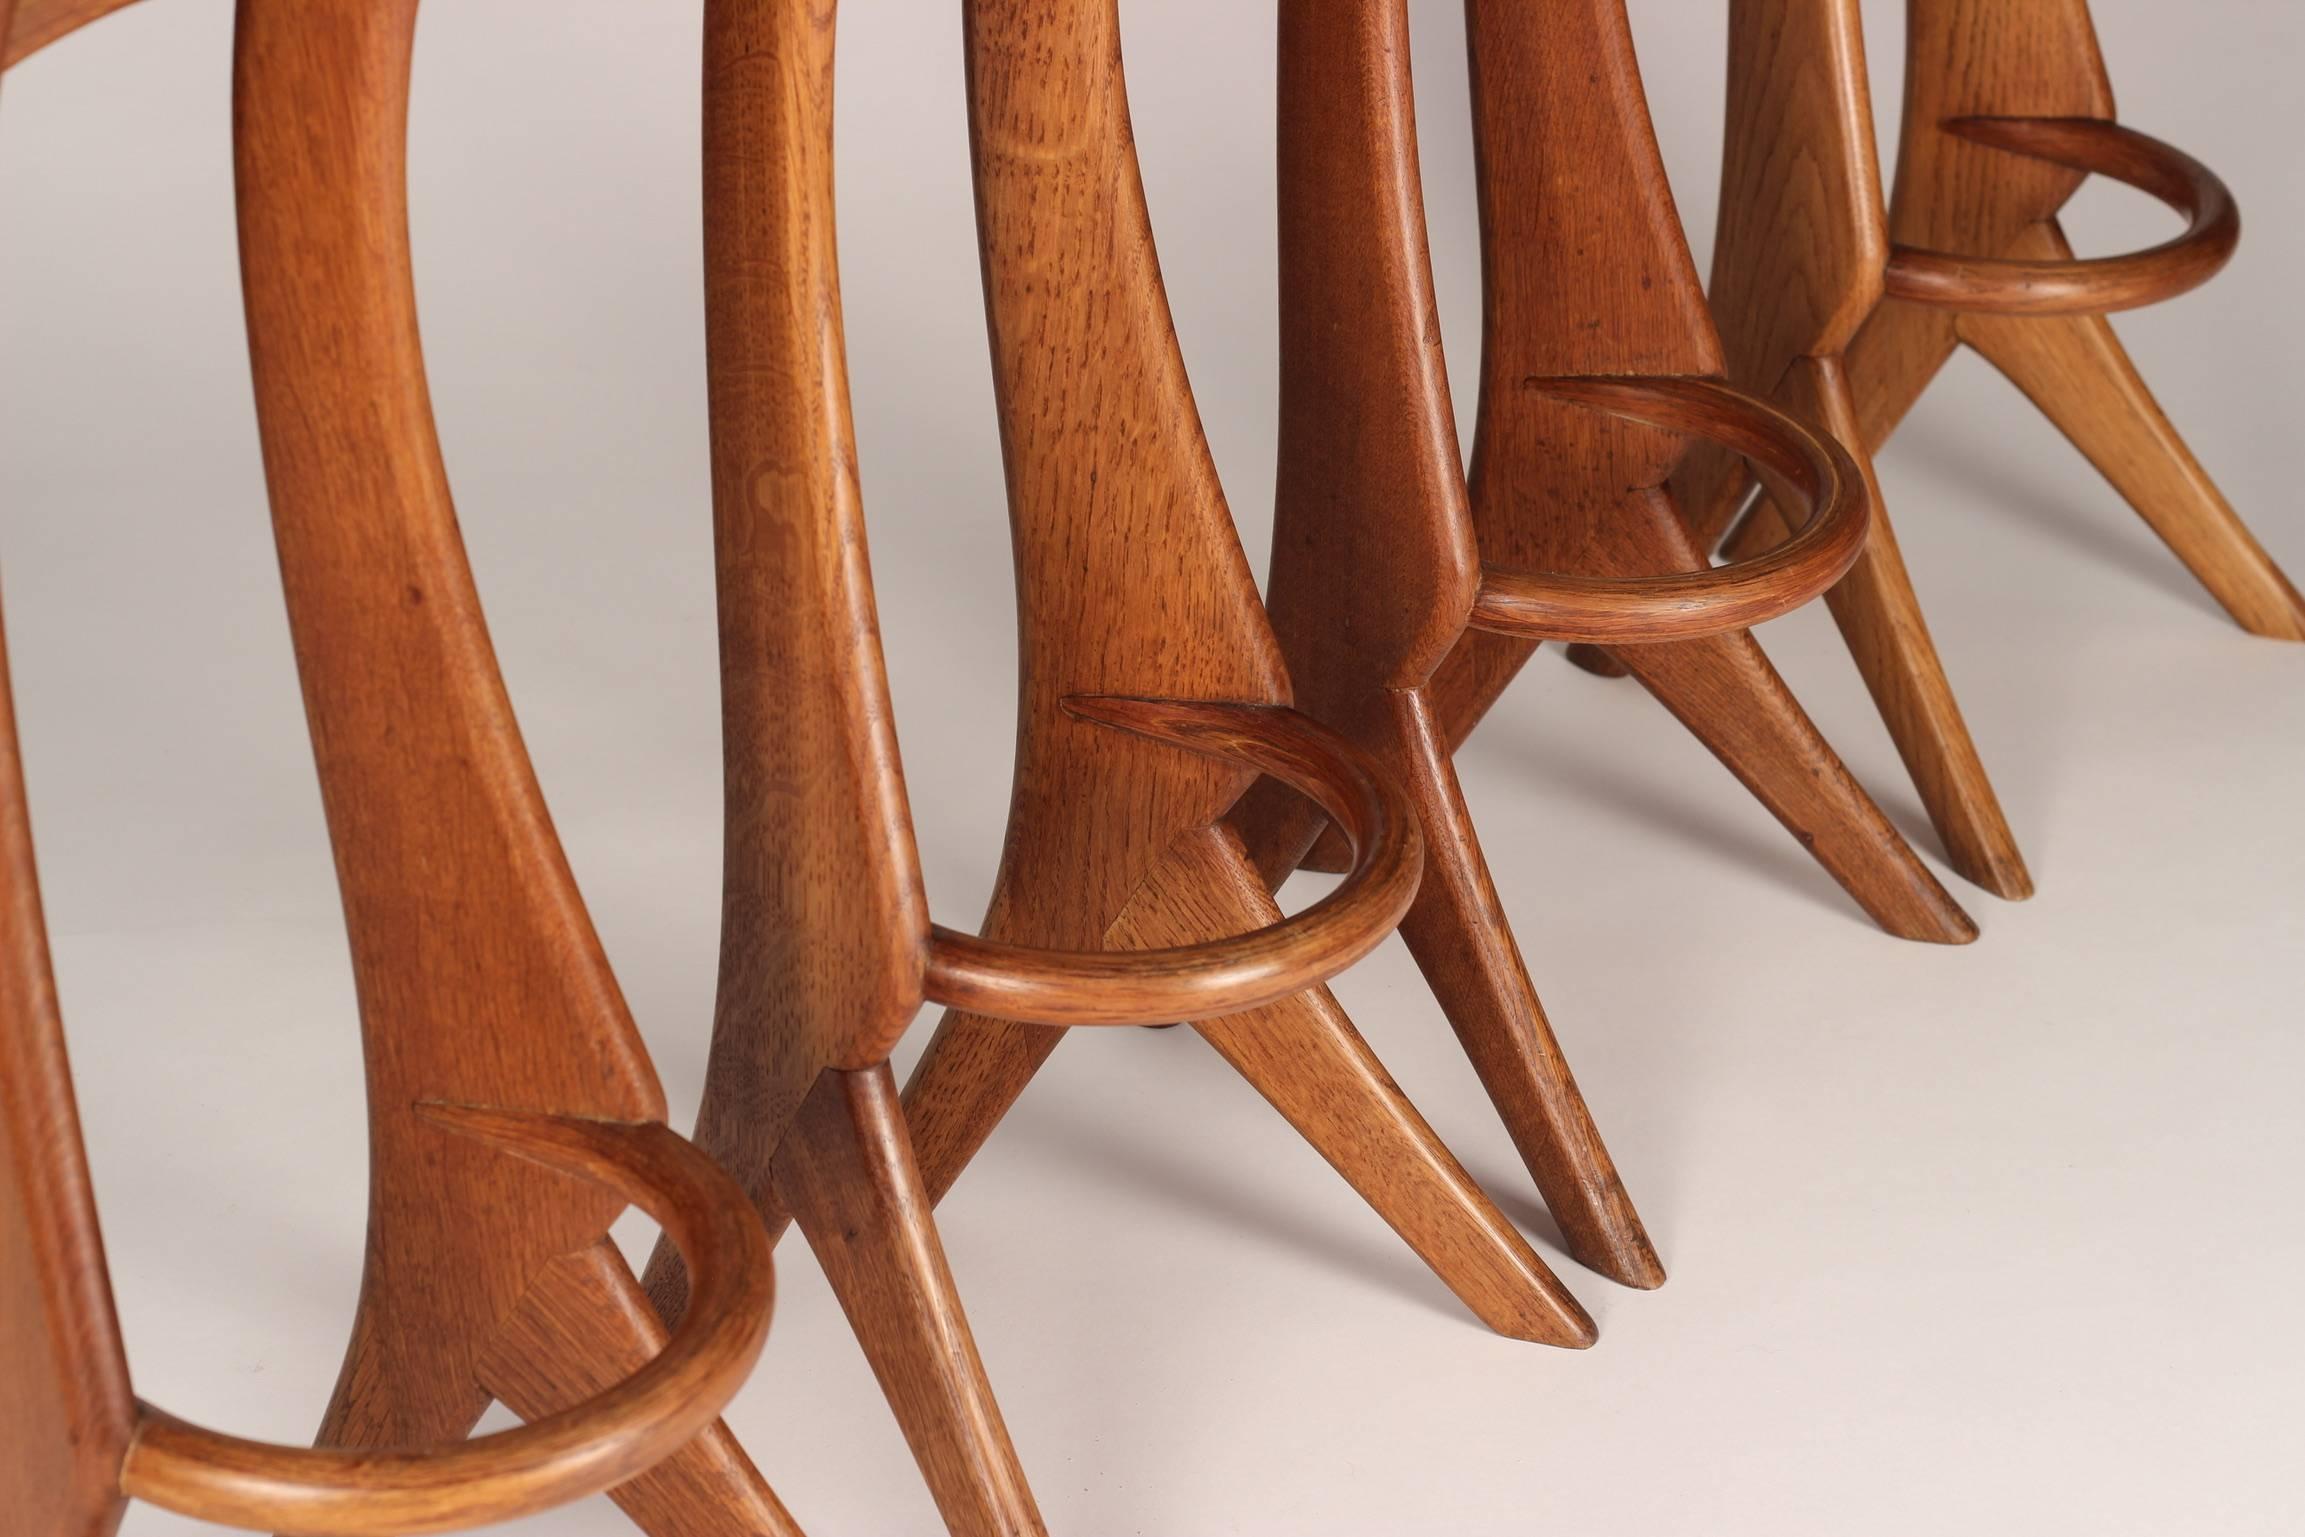 British Midcentury Barstools in Teak and Leather by Reyway